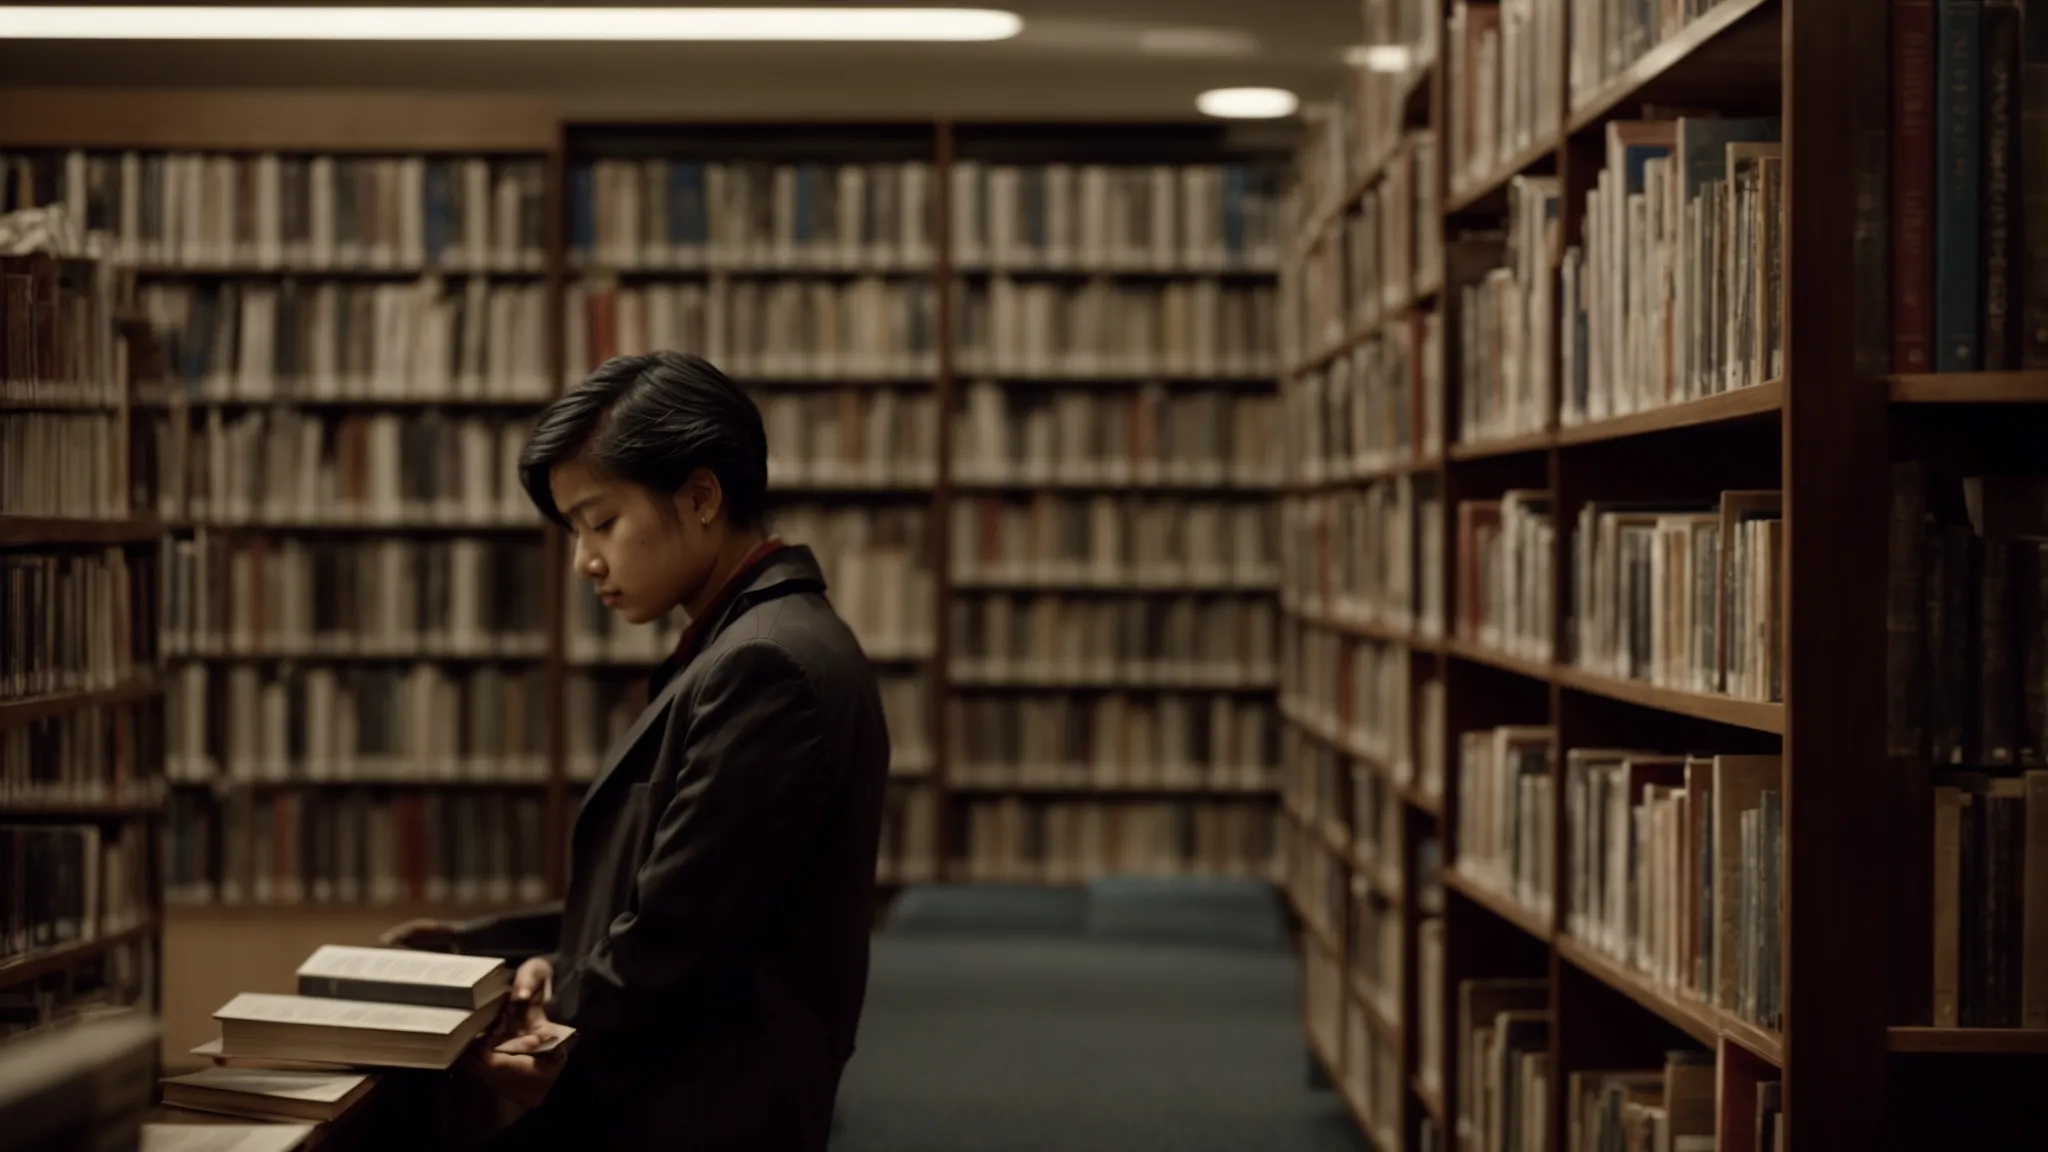 a person with a thoughtful expression browsing through thick law books in a library.